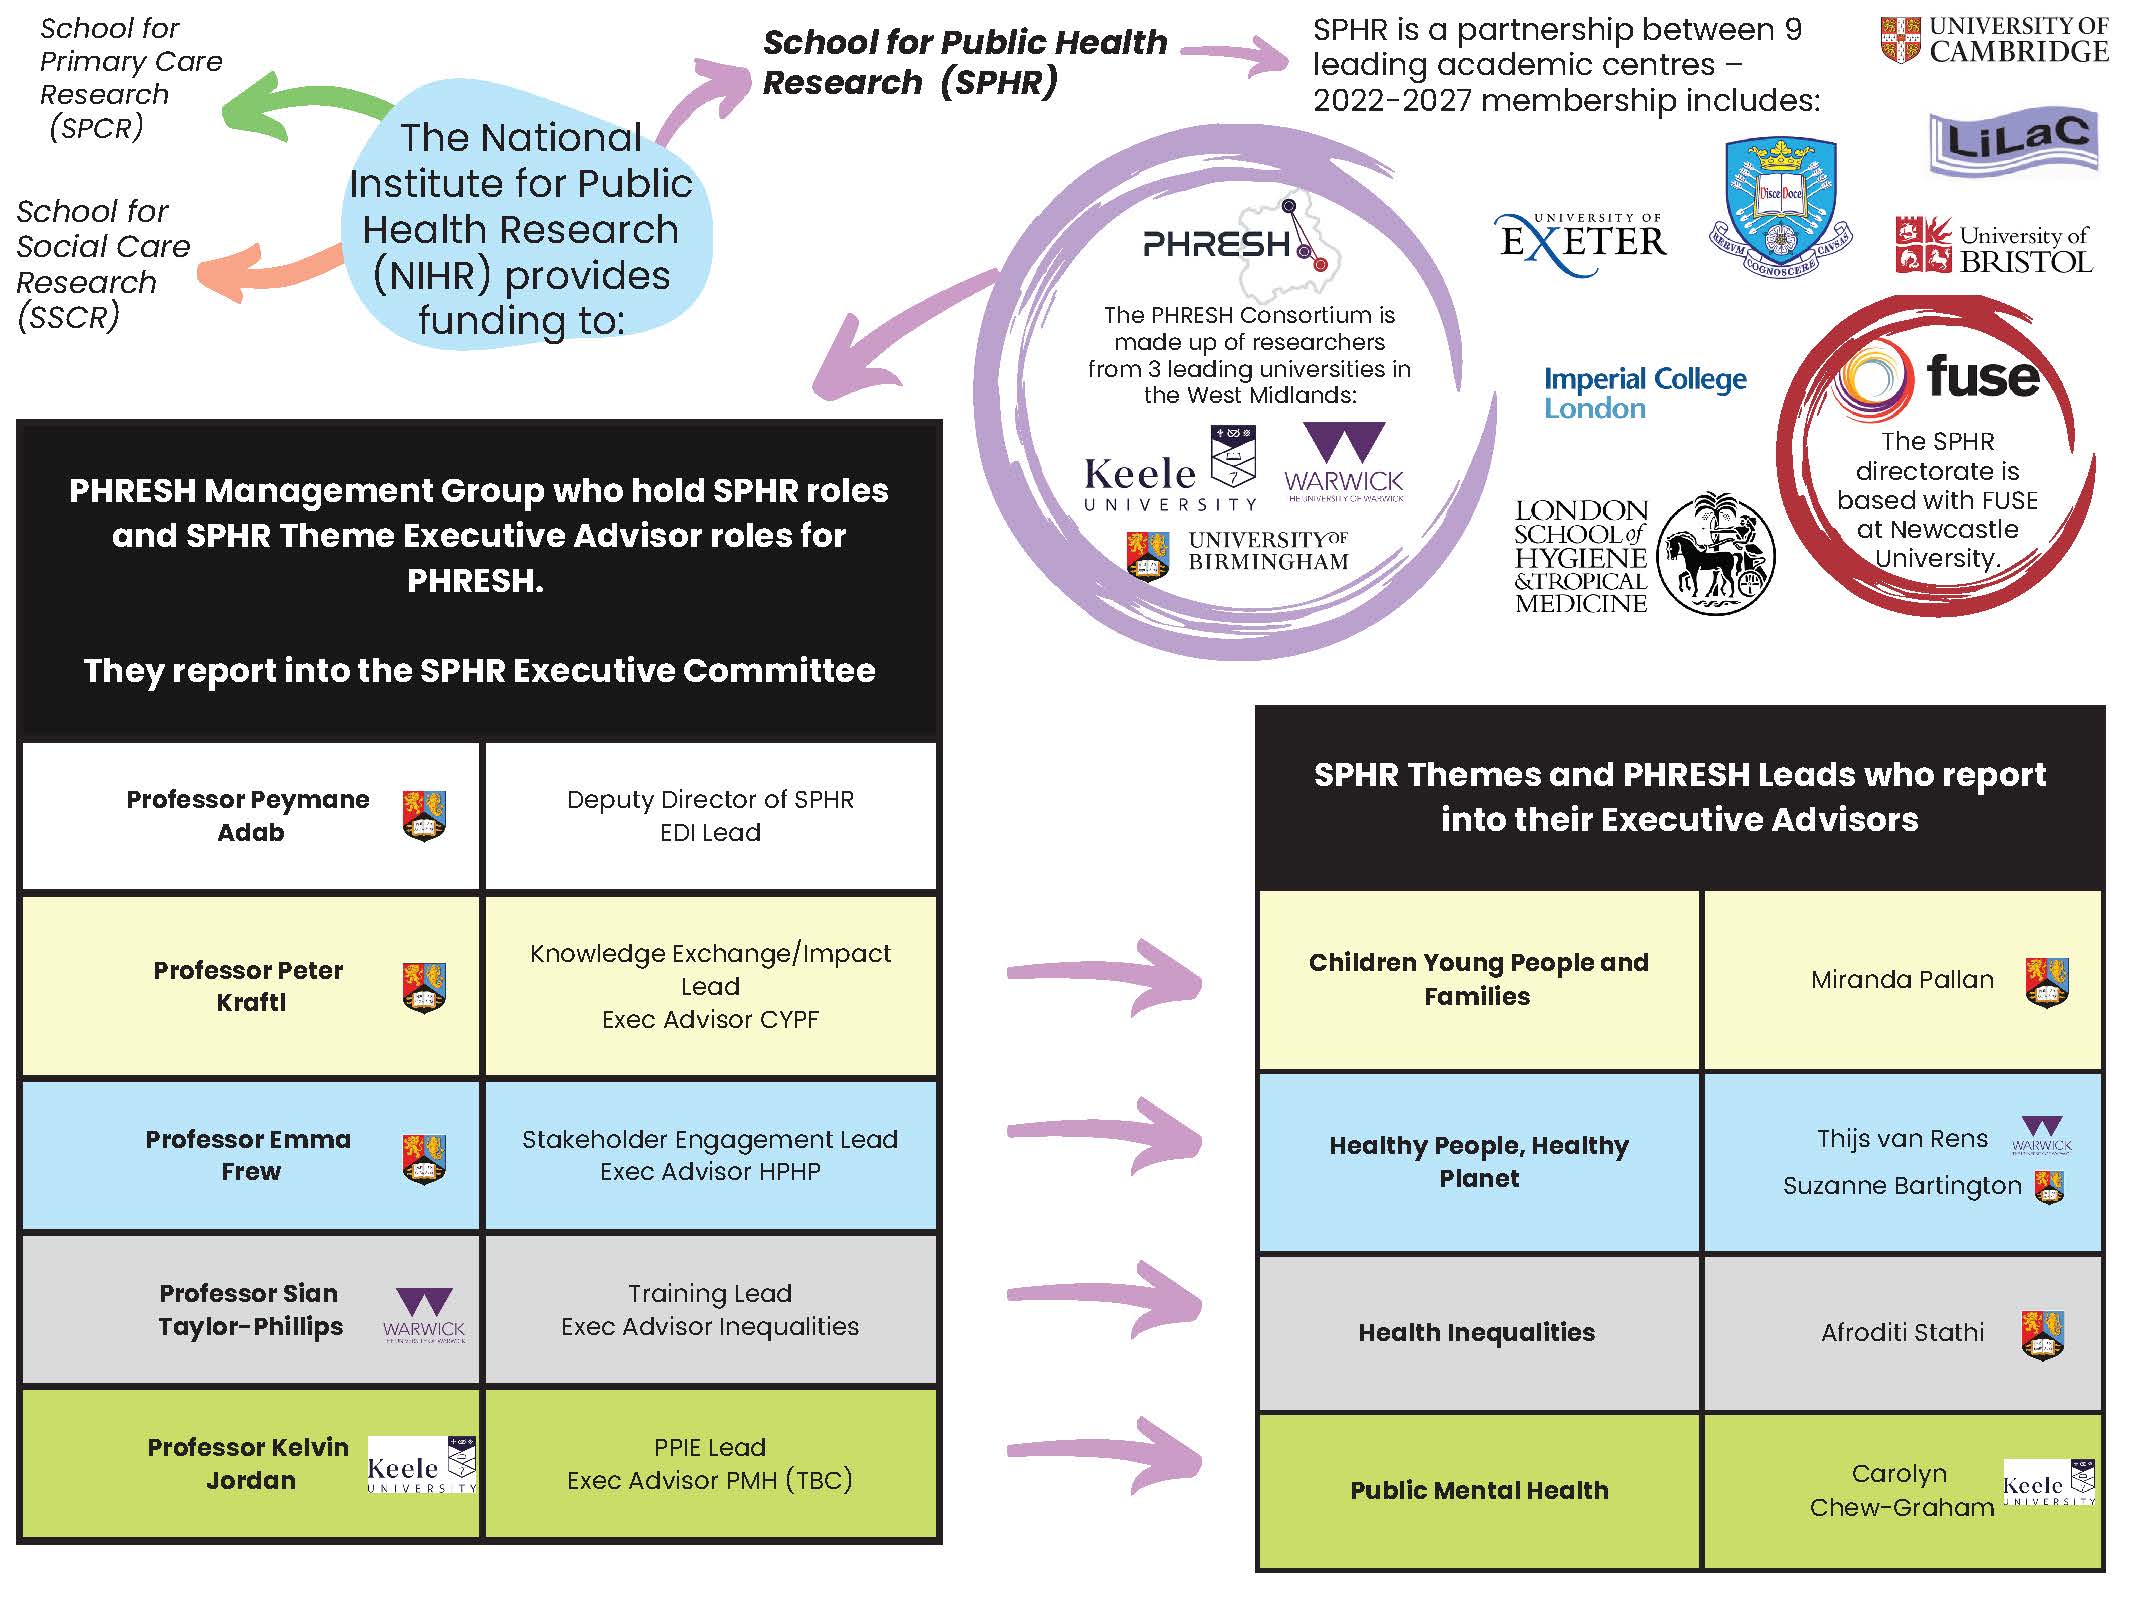 Diagram depicting School for Public Health Research (SPHR) consortium, partnerships and sources of funding. The PRESH Consortium is made up of researchers from 3 leading universities in the West Midlands: Keele University, Warwick University, and the University of Birmingham. There are five academics who form the PHRESH Management Group and Theme Executive Advisor Roles who hold SPHR roles and report into the SPHR Executive Committee. There are four individual SPHR Themes and PHRESH Leads who report into their Executive Advisors. The themes are Children, Young People and Families, Health People, Health Planet, Health Inequalities and Public Mental Health.